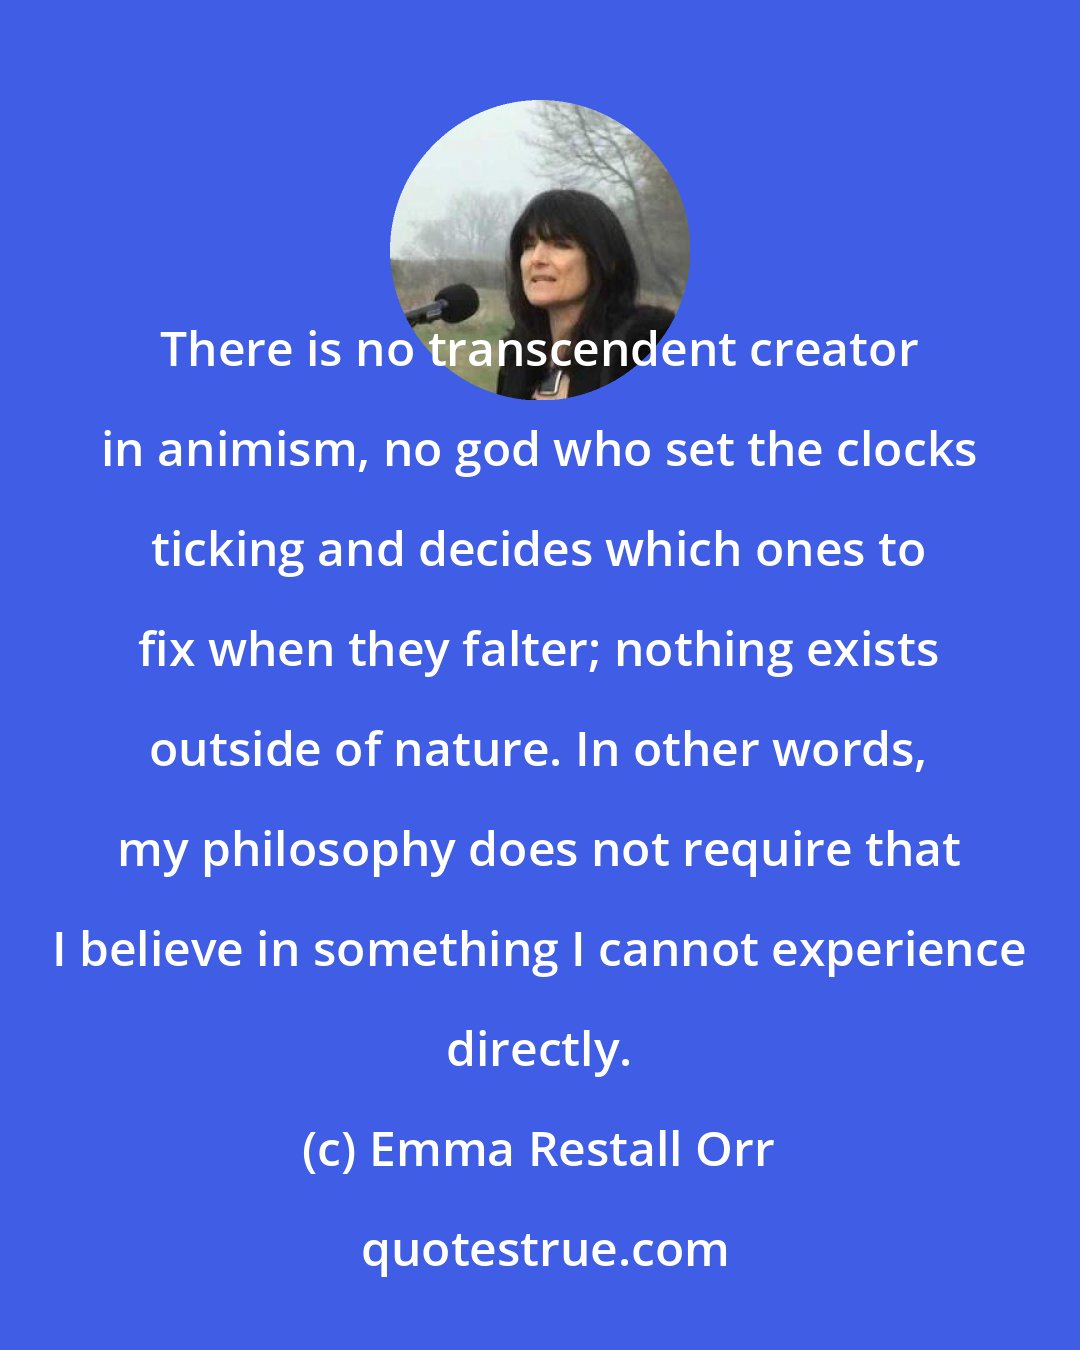 Emma Restall Orr: There is no transcendent creator in animism, no god who set the clocks ticking and decides which ones to fix when they falter; nothing exists outside of nature. In other words, my philosophy does not require that I believe in something I cannot experience directly.